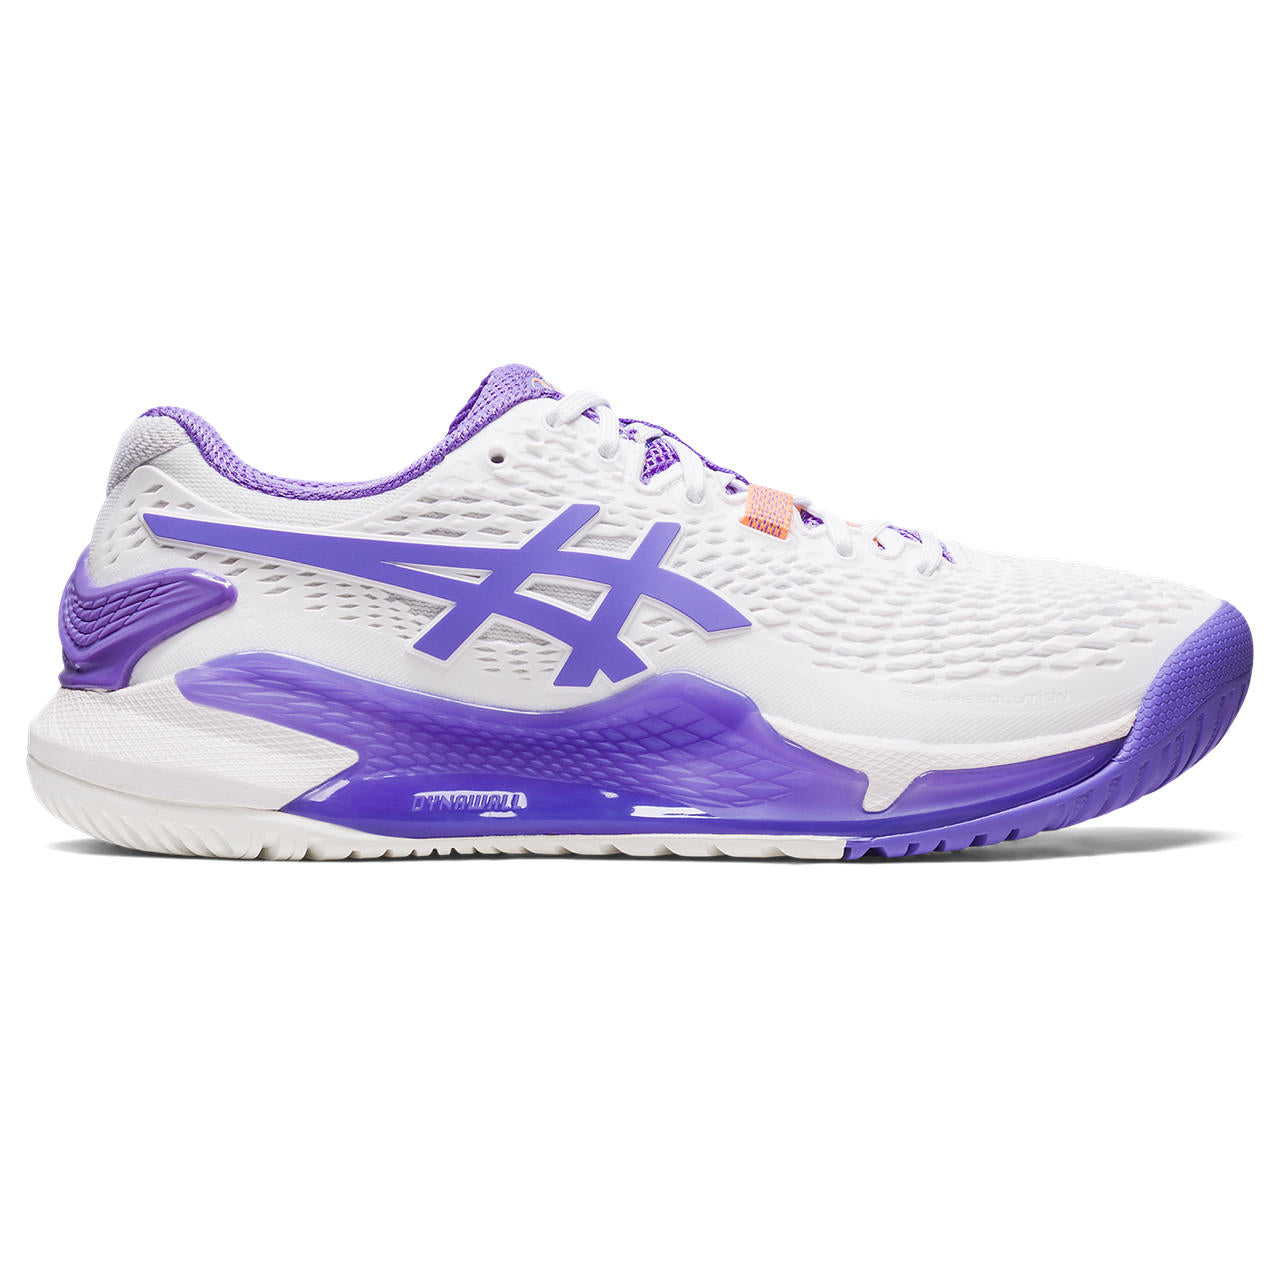 Lateral view of the Women's ASIC Resolution 9 tennis shoe in the color White/Amethyst